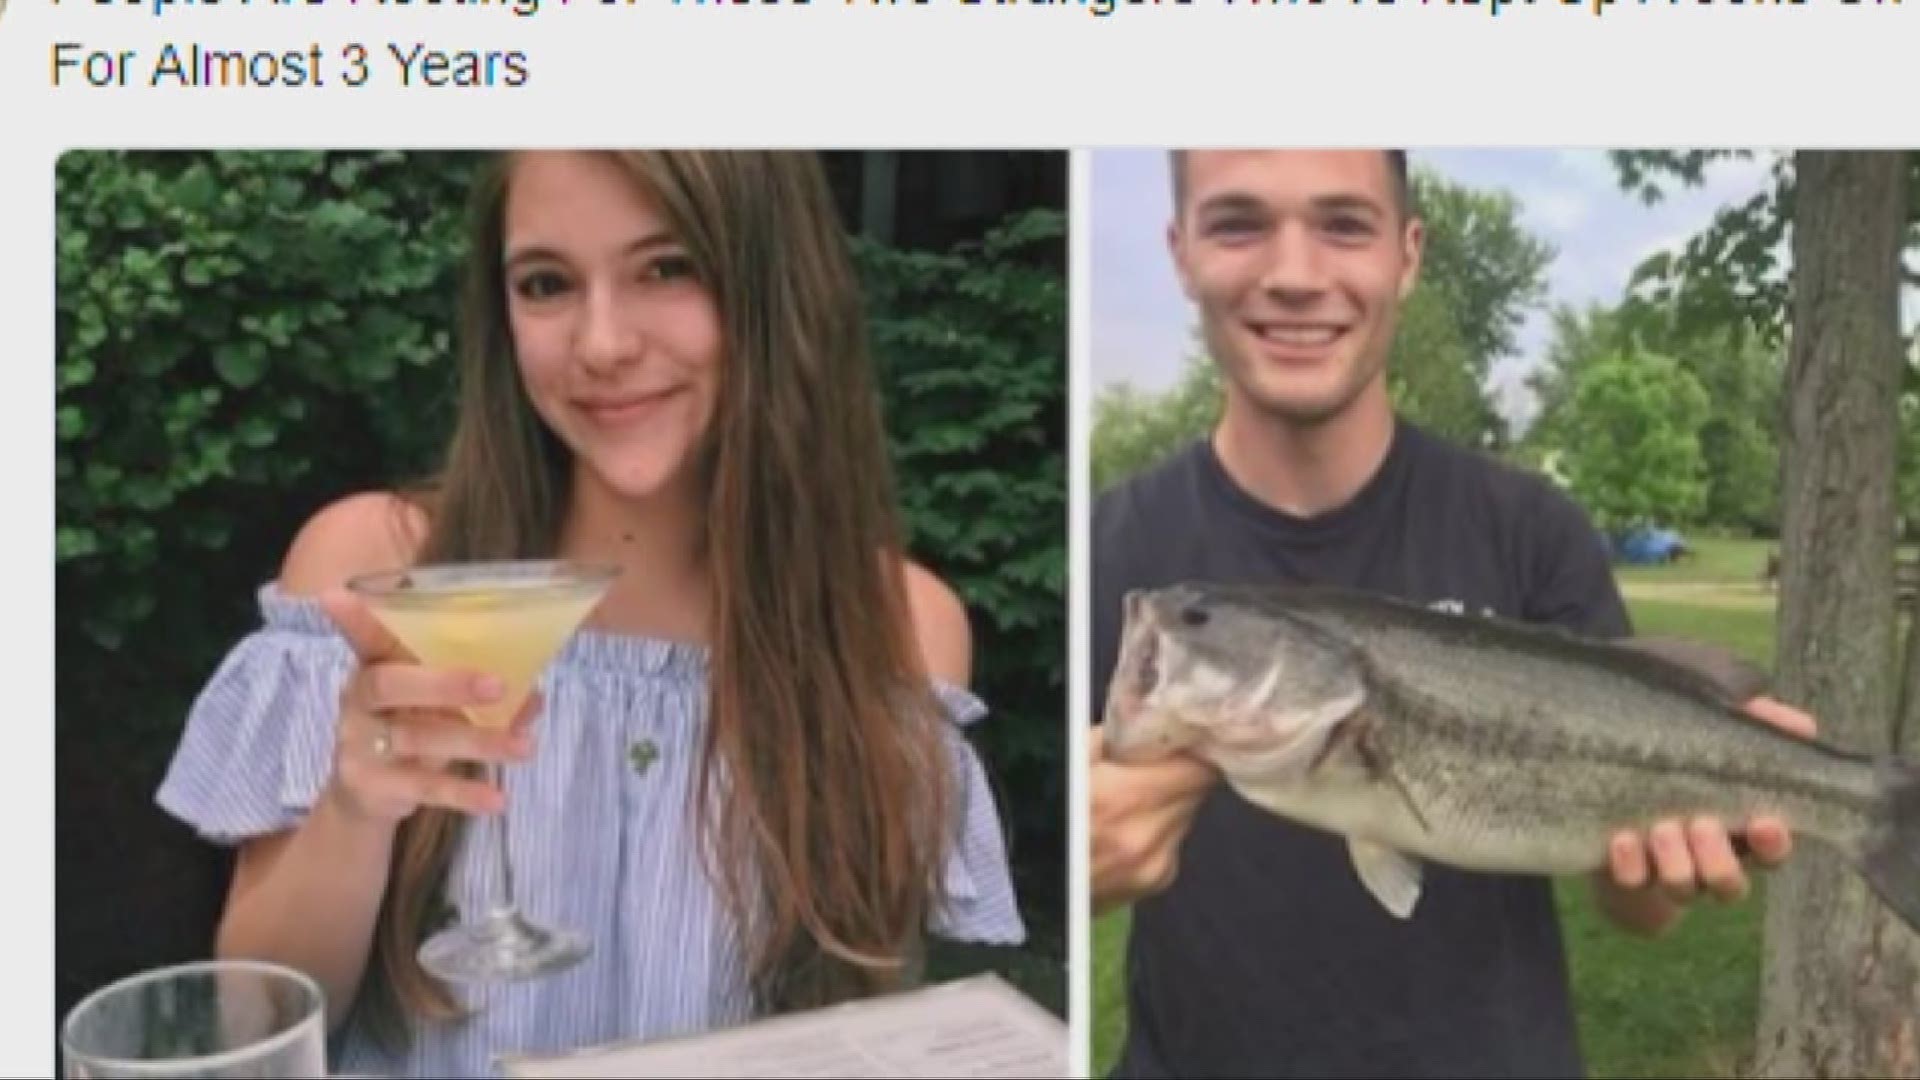 July 13, 2017: After exchanging messages on Tinder for years, the story of two Kent State University seniors is going viral. Tinder is now sending them on a trip to Hawaii.